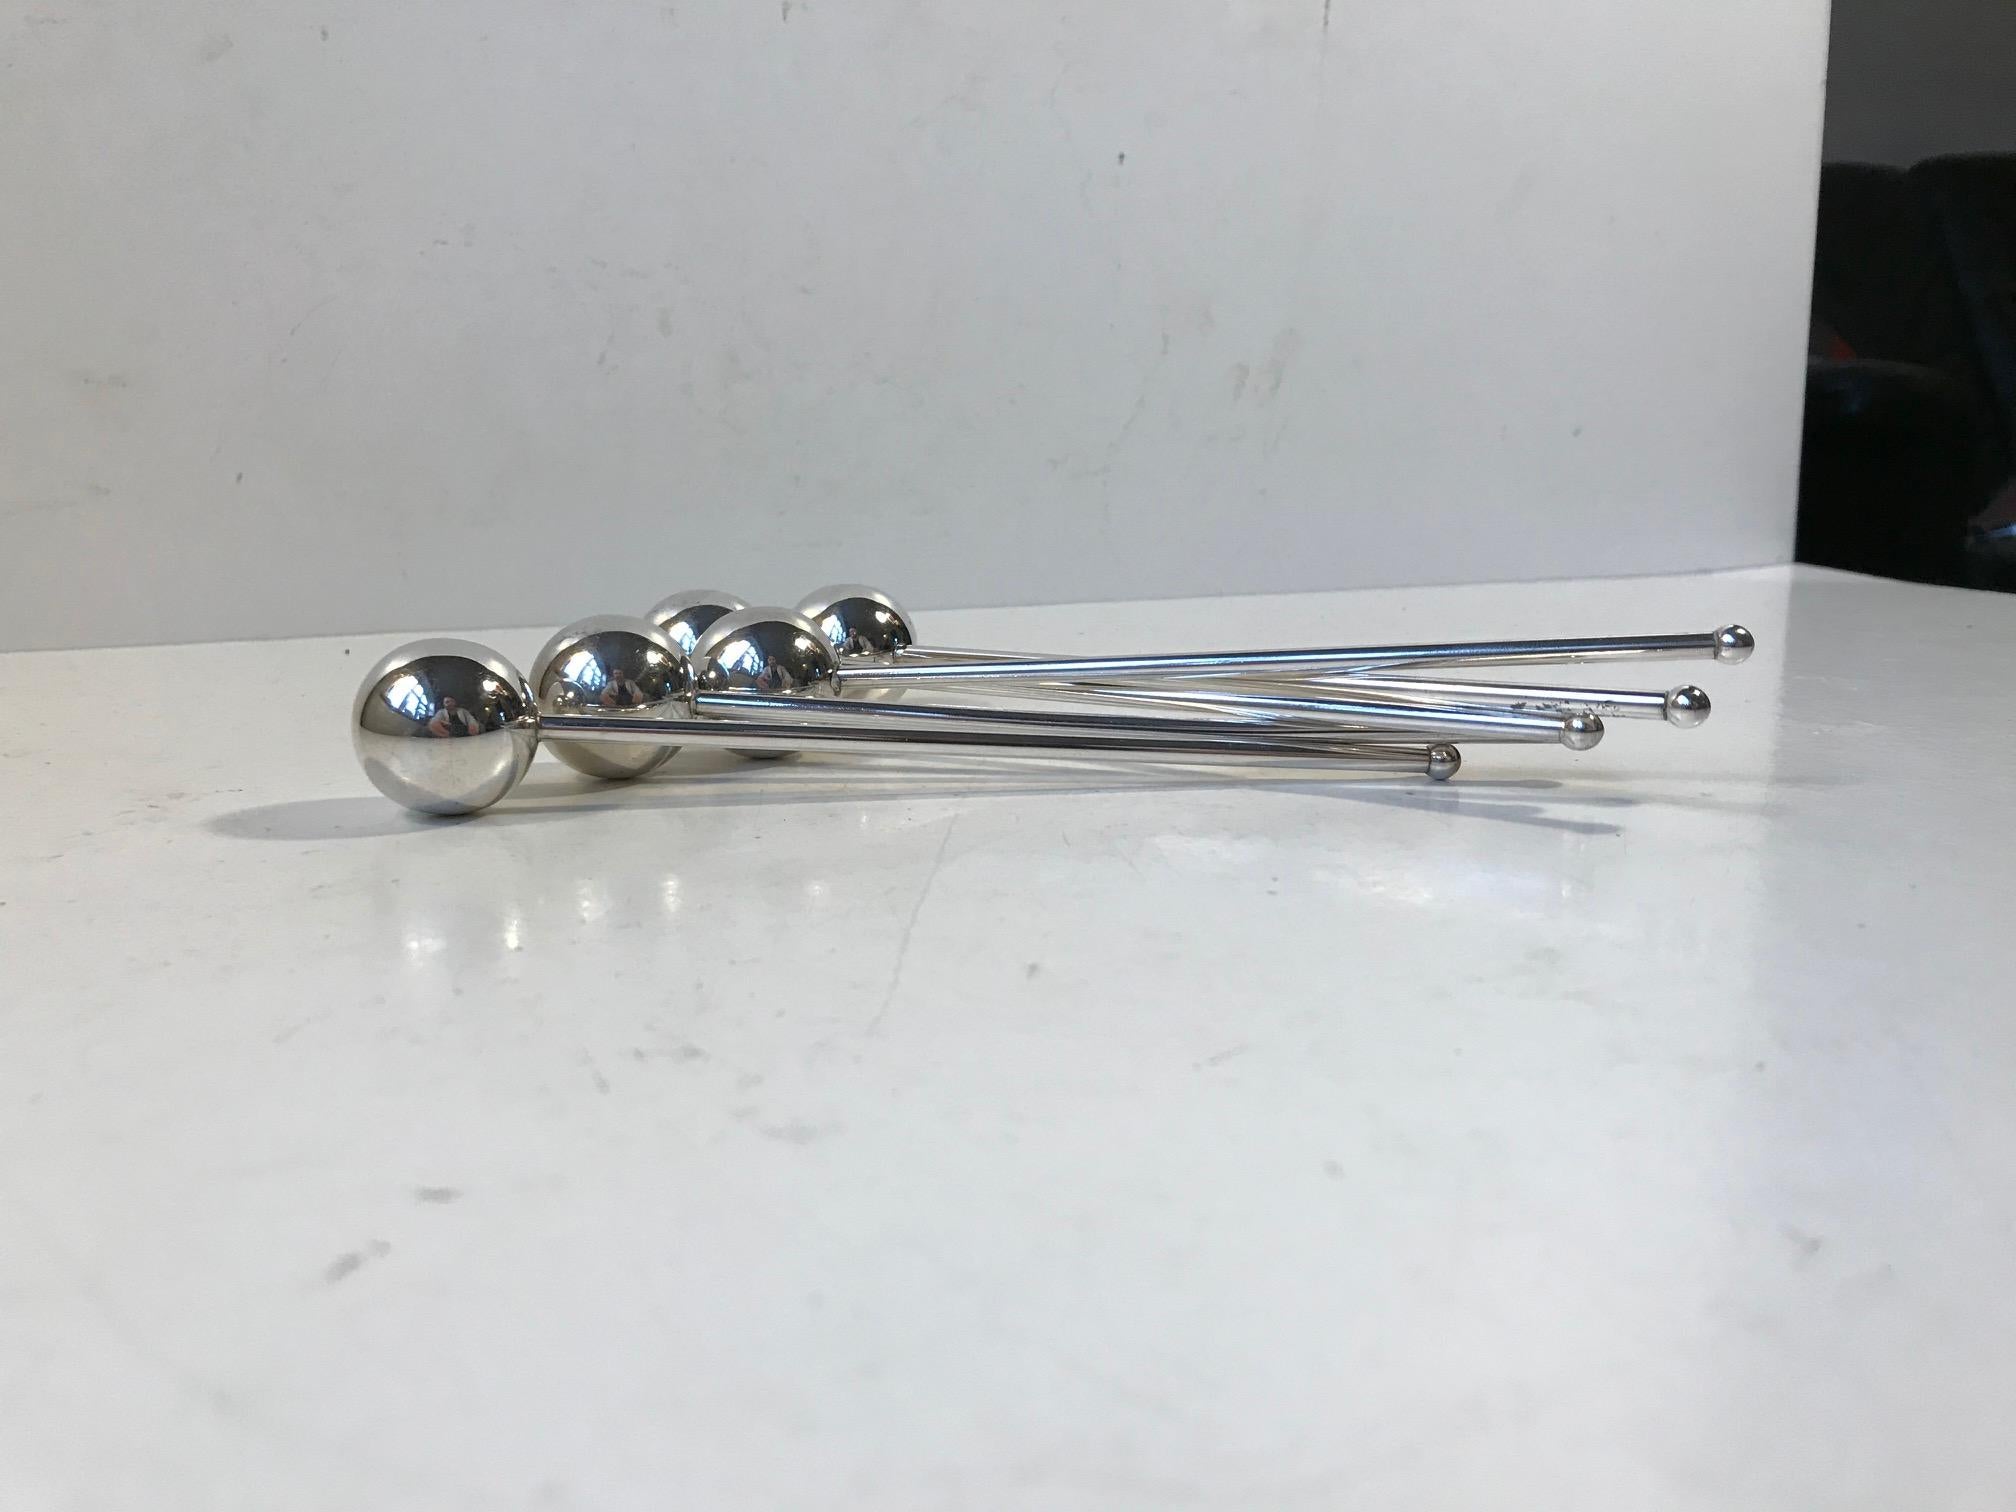 A set of 5 drink coolers or stirrers. Composed silver plated brass. Designed of manufactured by ABSA in Denmark in a style reminiscent of Piet Hein.